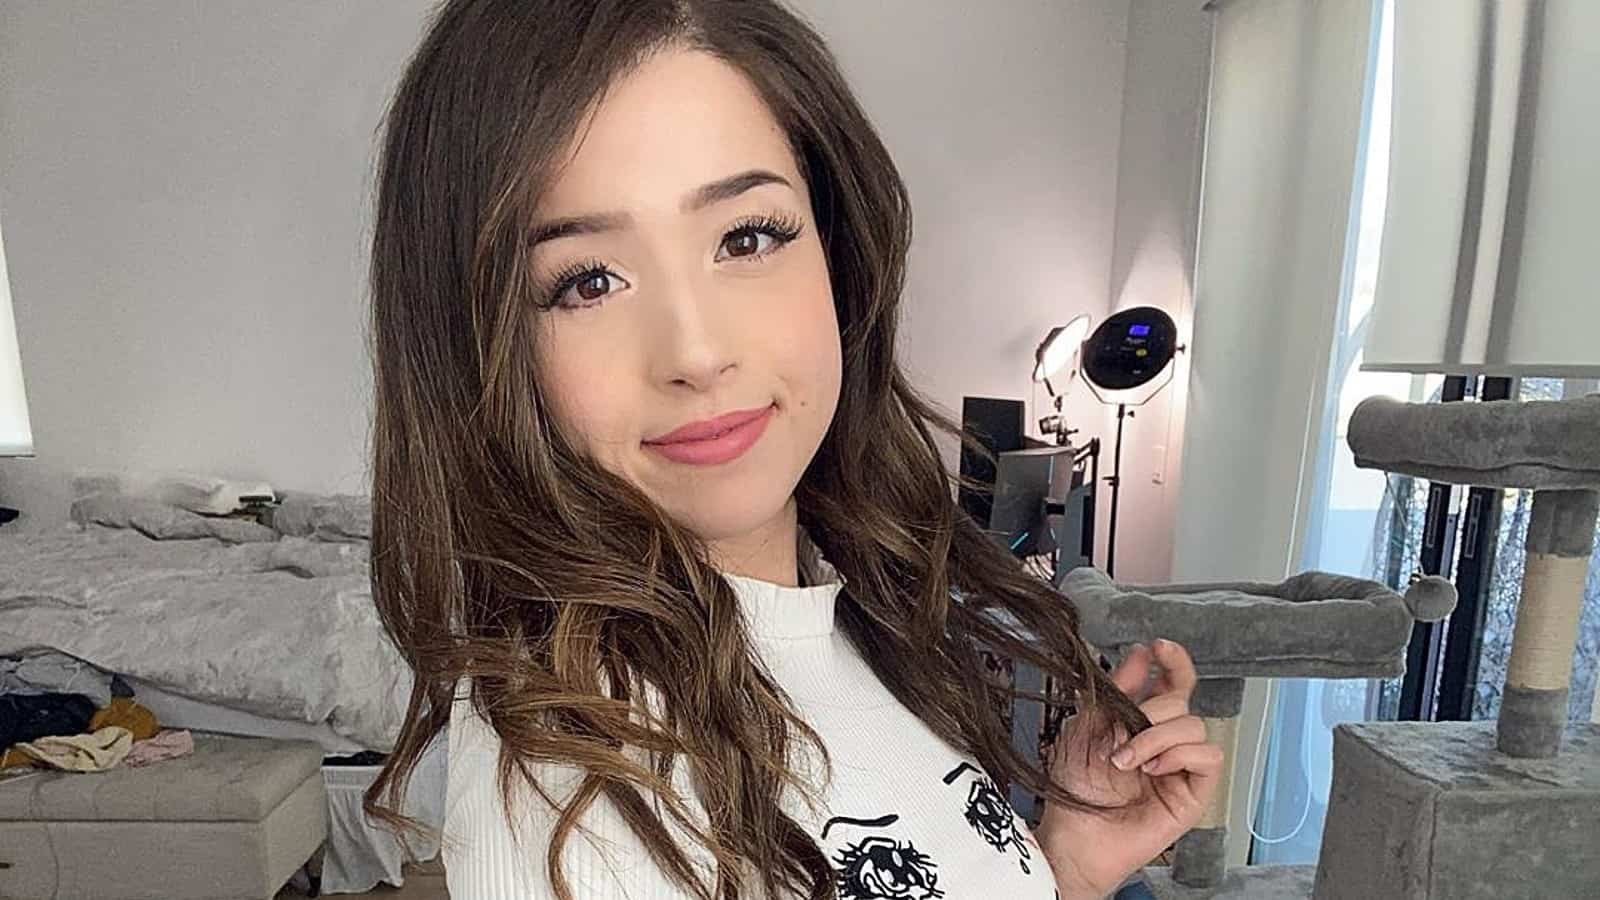 Photo of Pokimane from her IG account